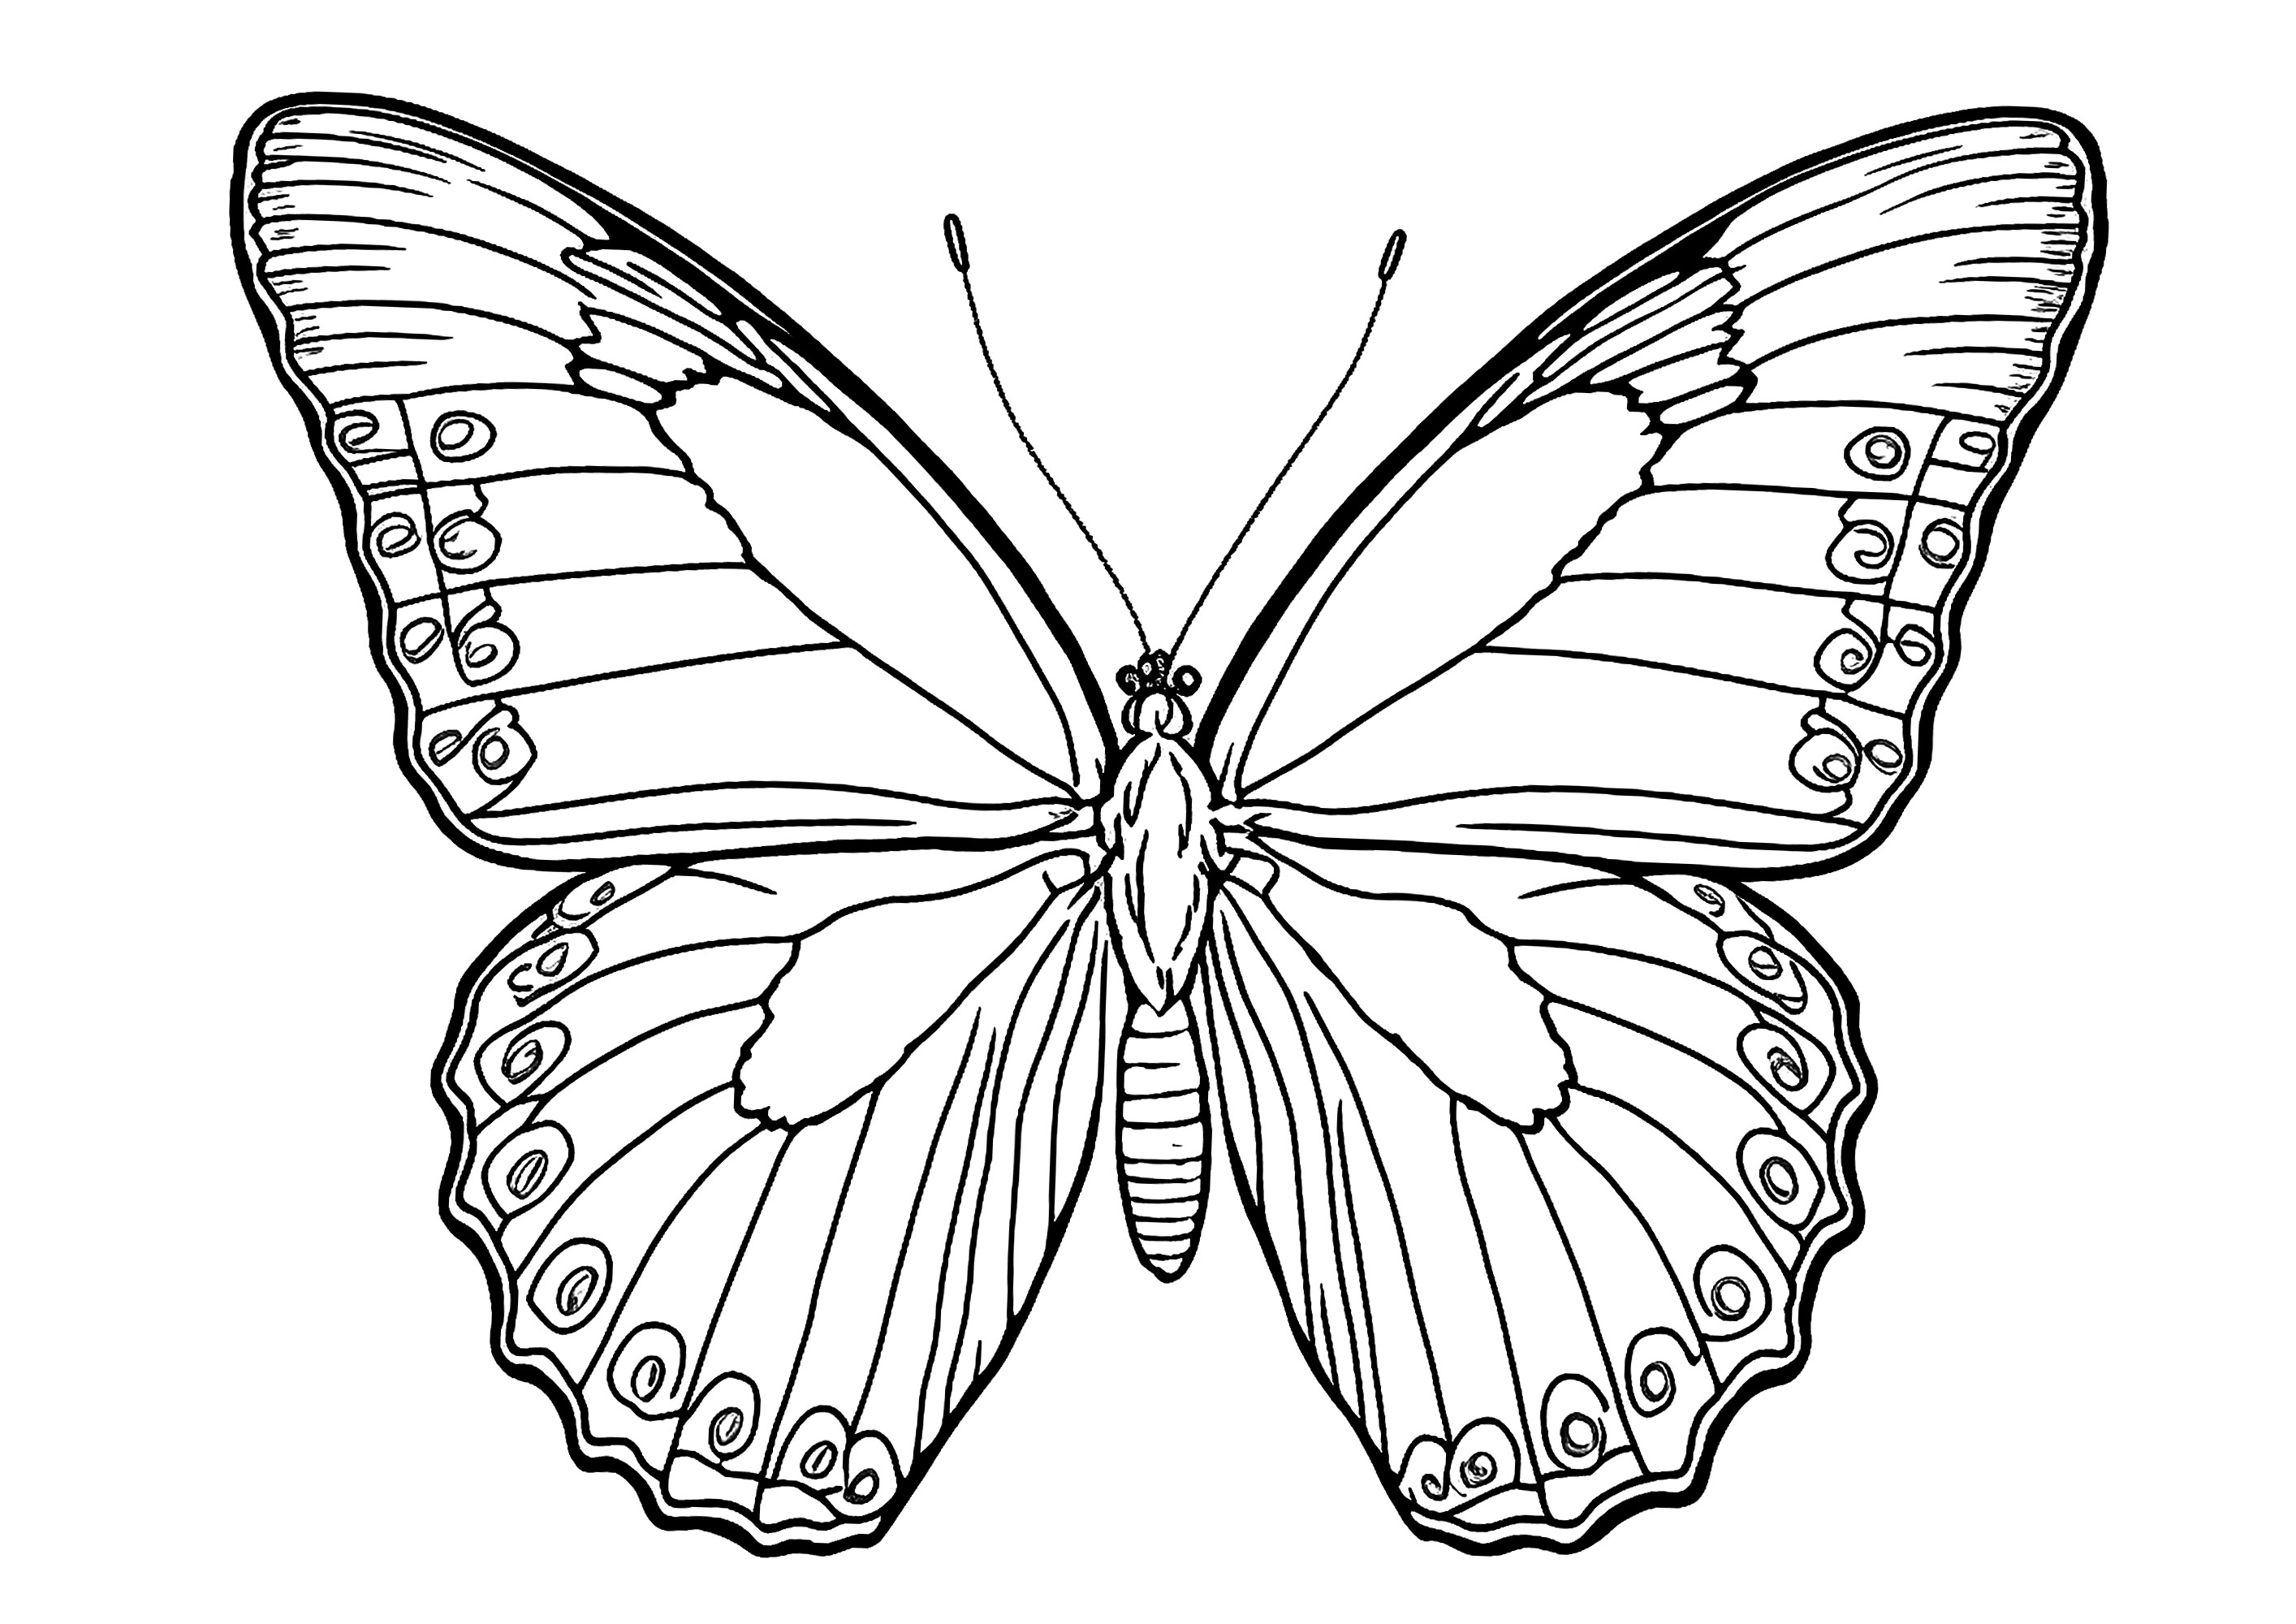 Butterfly coloring pages for kids to print